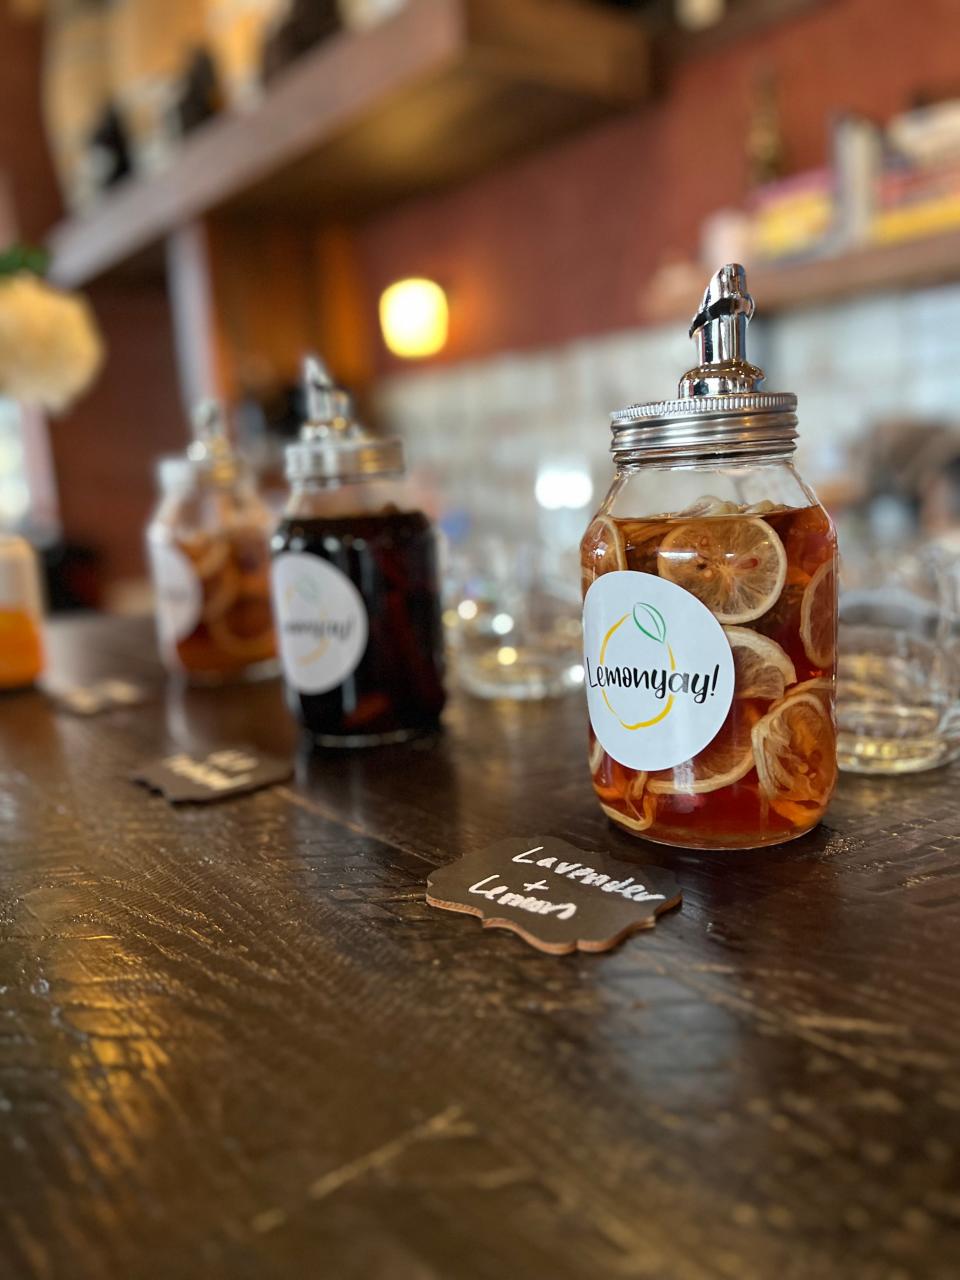 Amanda Wisth creates cocktail infusions for her business, Lemonyay!